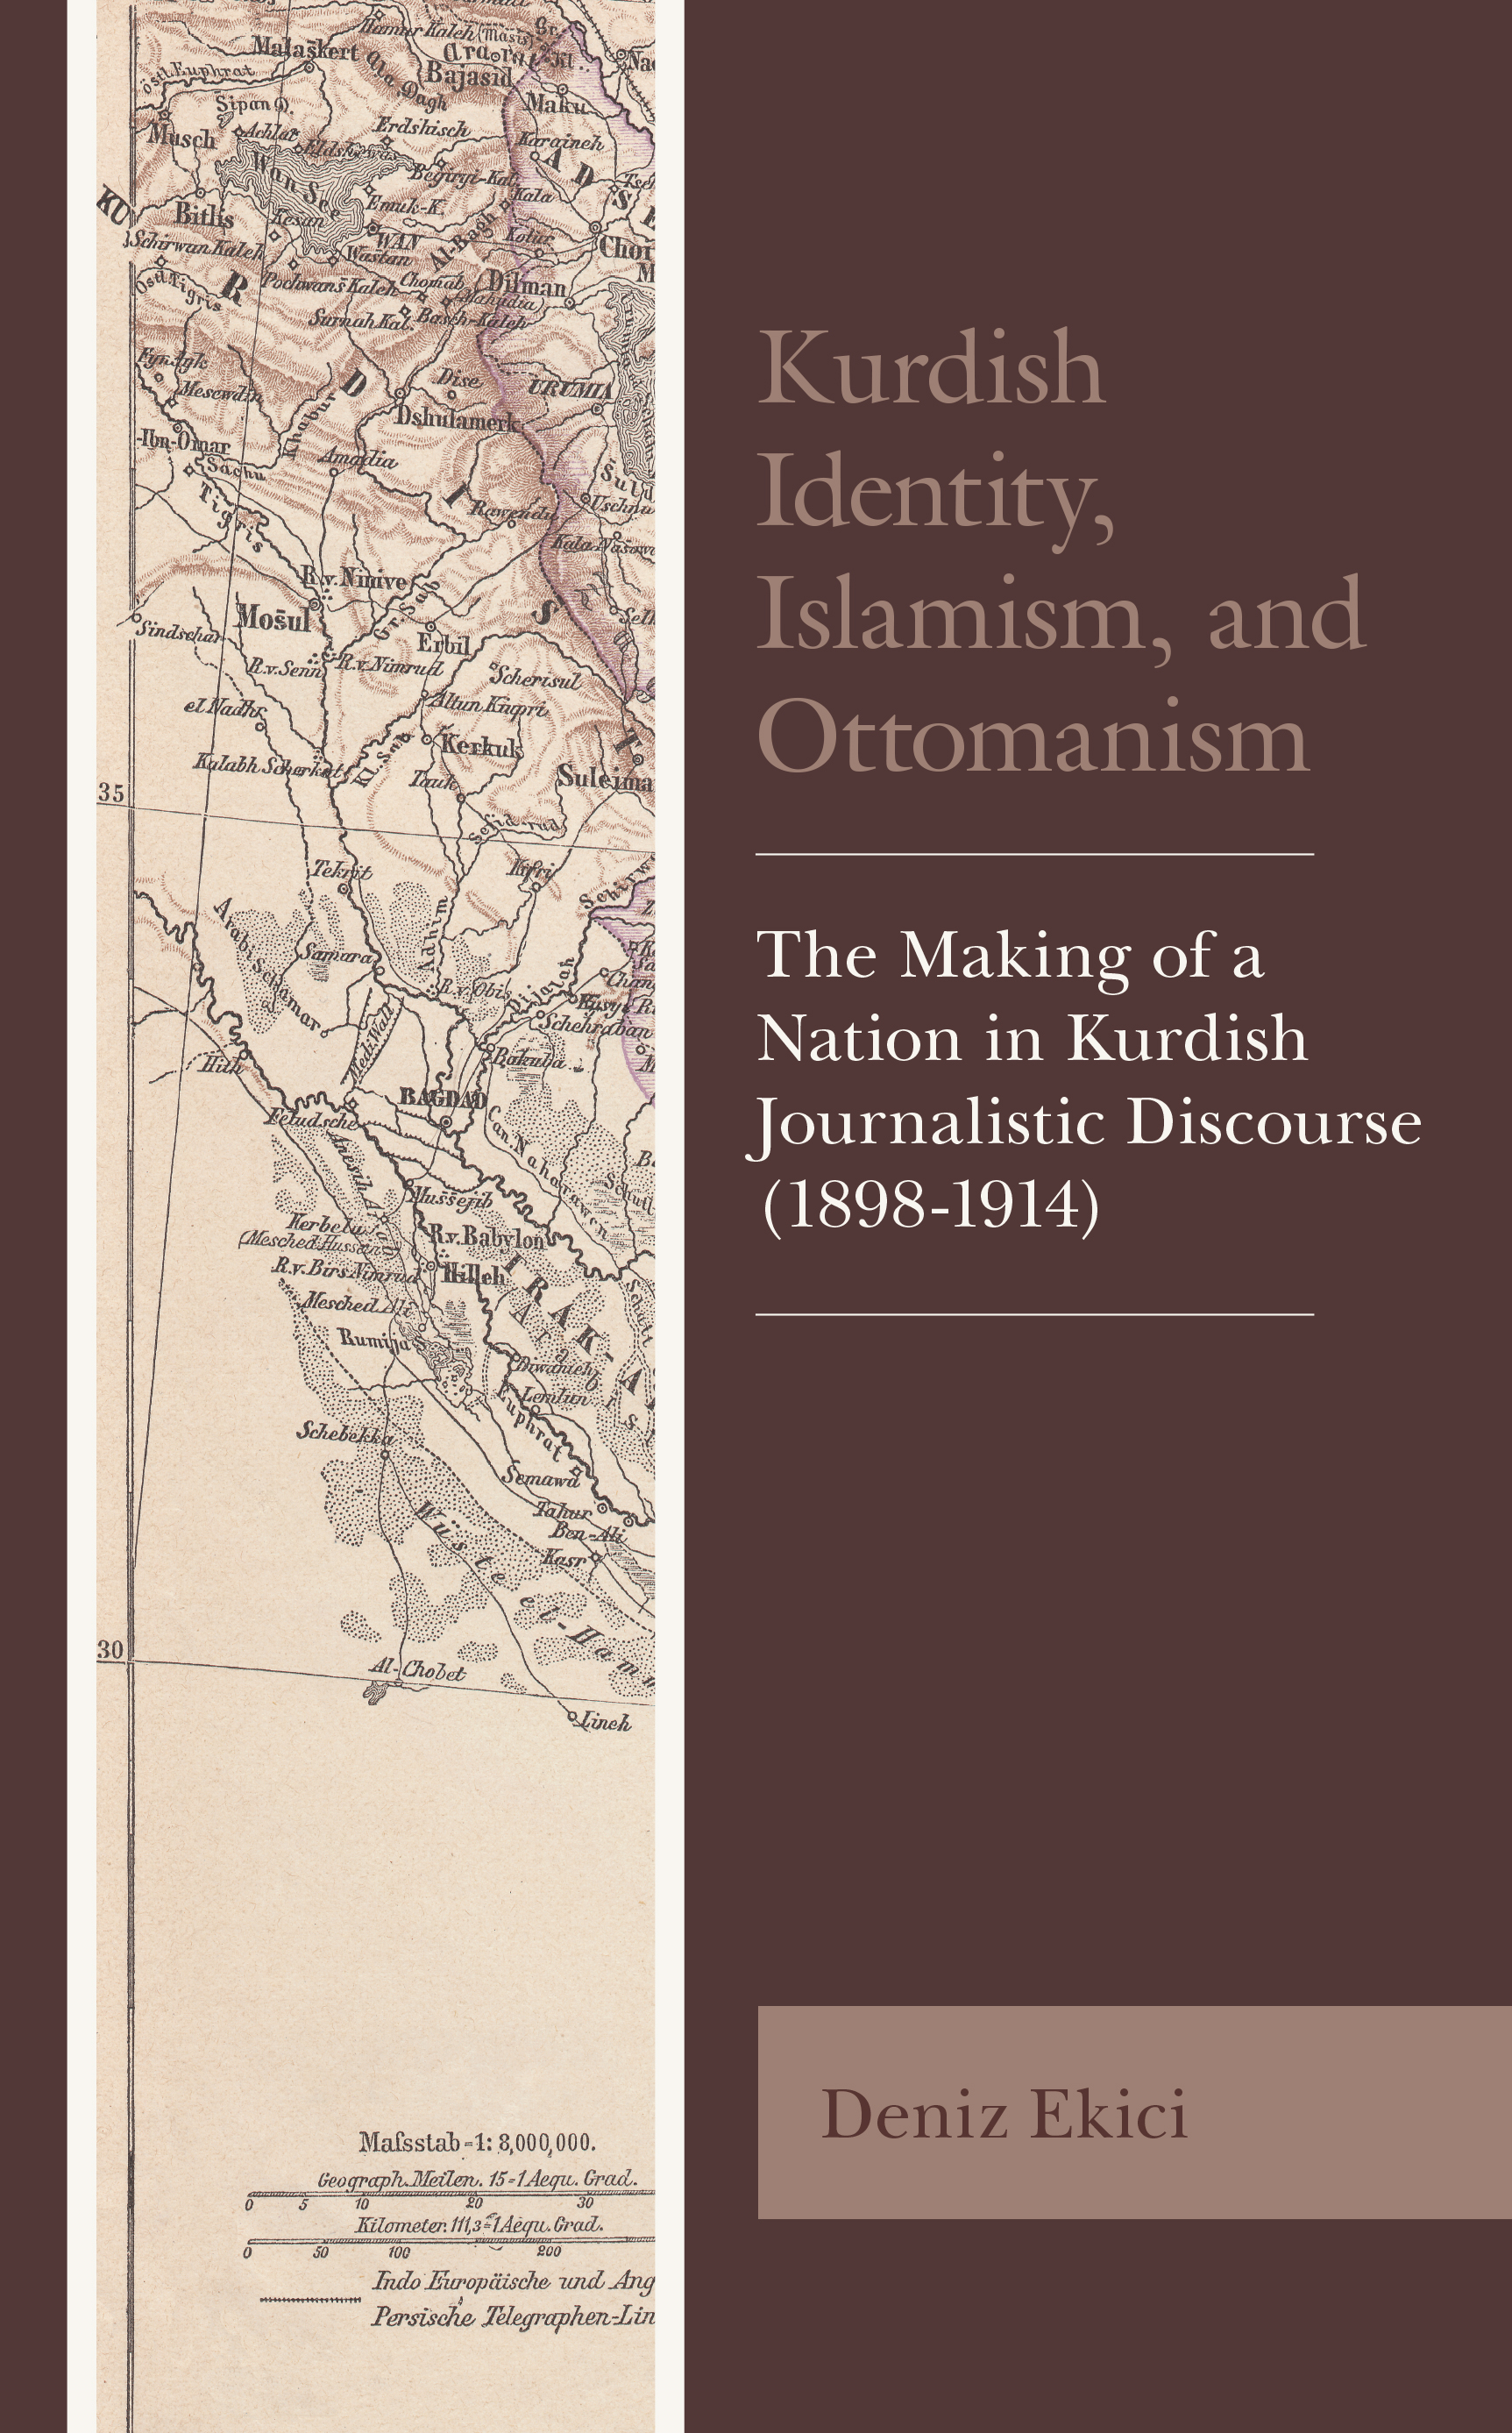 Kurdish Identity, Islamism, and Ottomanism: The Making of a Nation in Kurdish Journalistic Discourse (1898-1914)